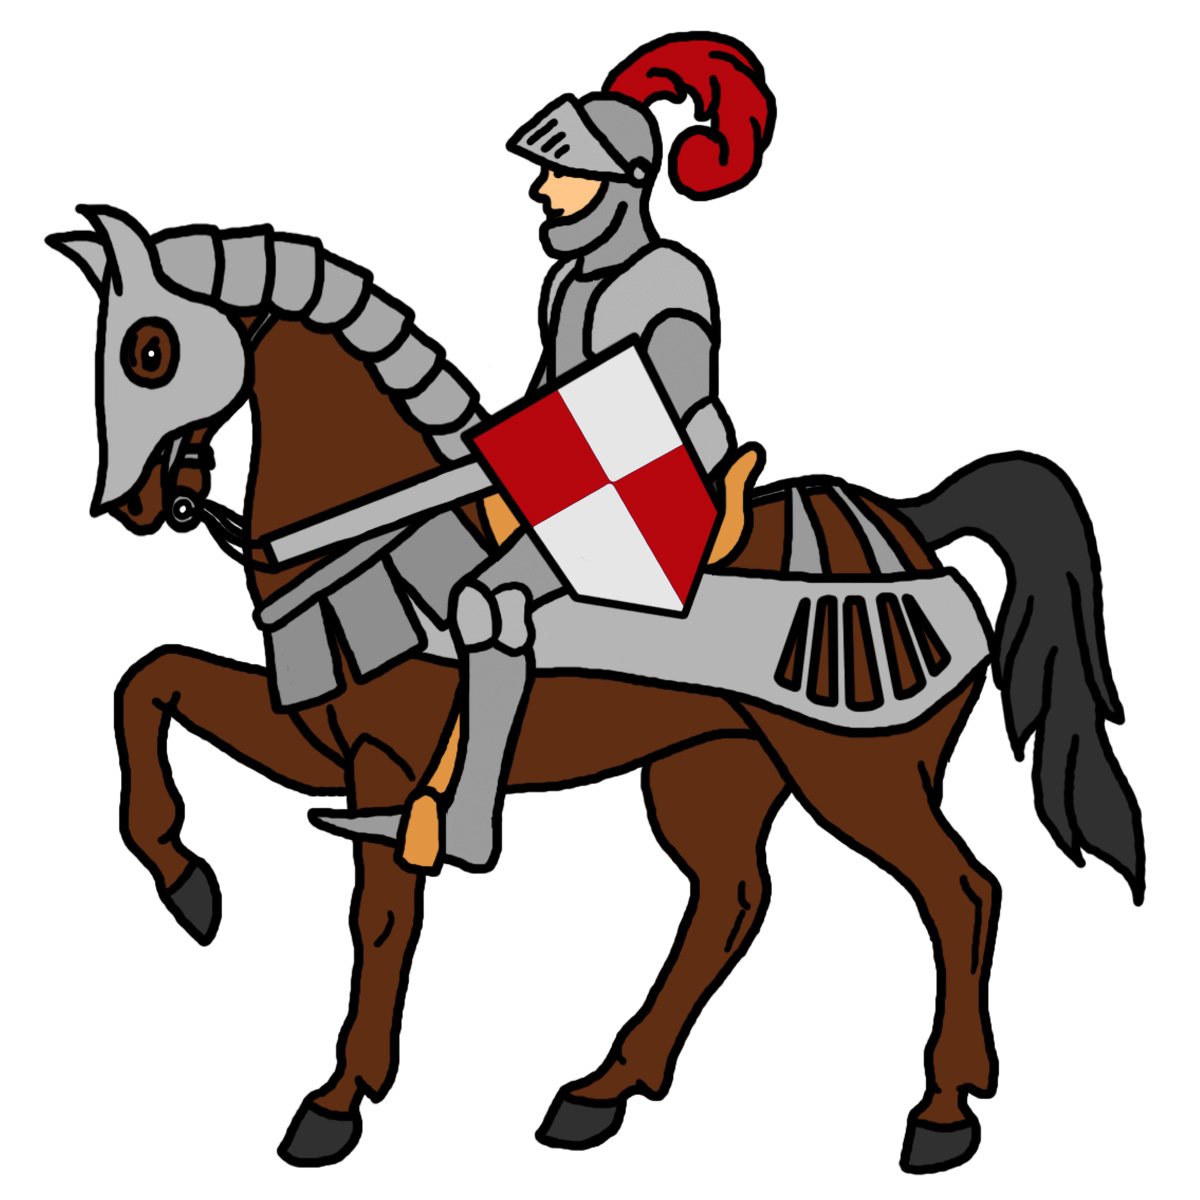 Medieval Times Clipart - ClipArt Best